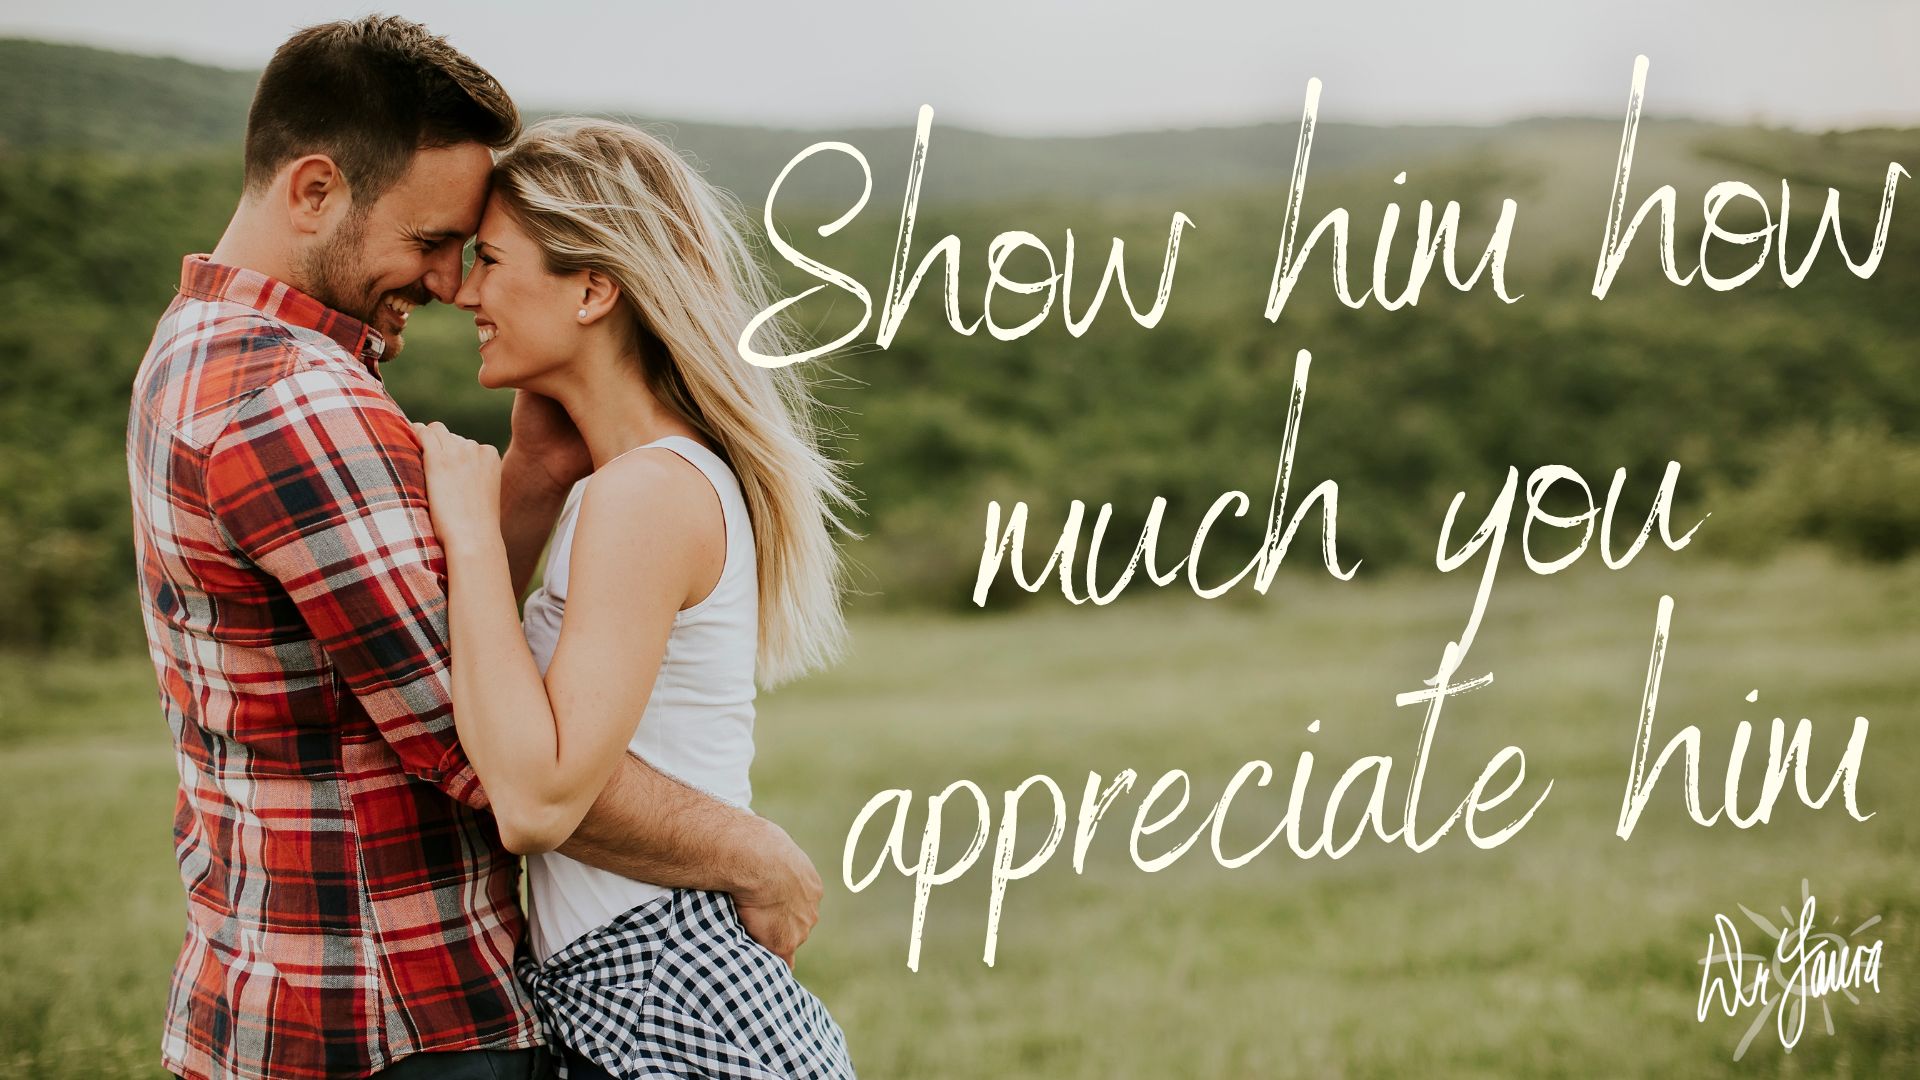 Blog: Ways to Make Your Husband Feel Loved and Respected Quote show him how much you appreciate him